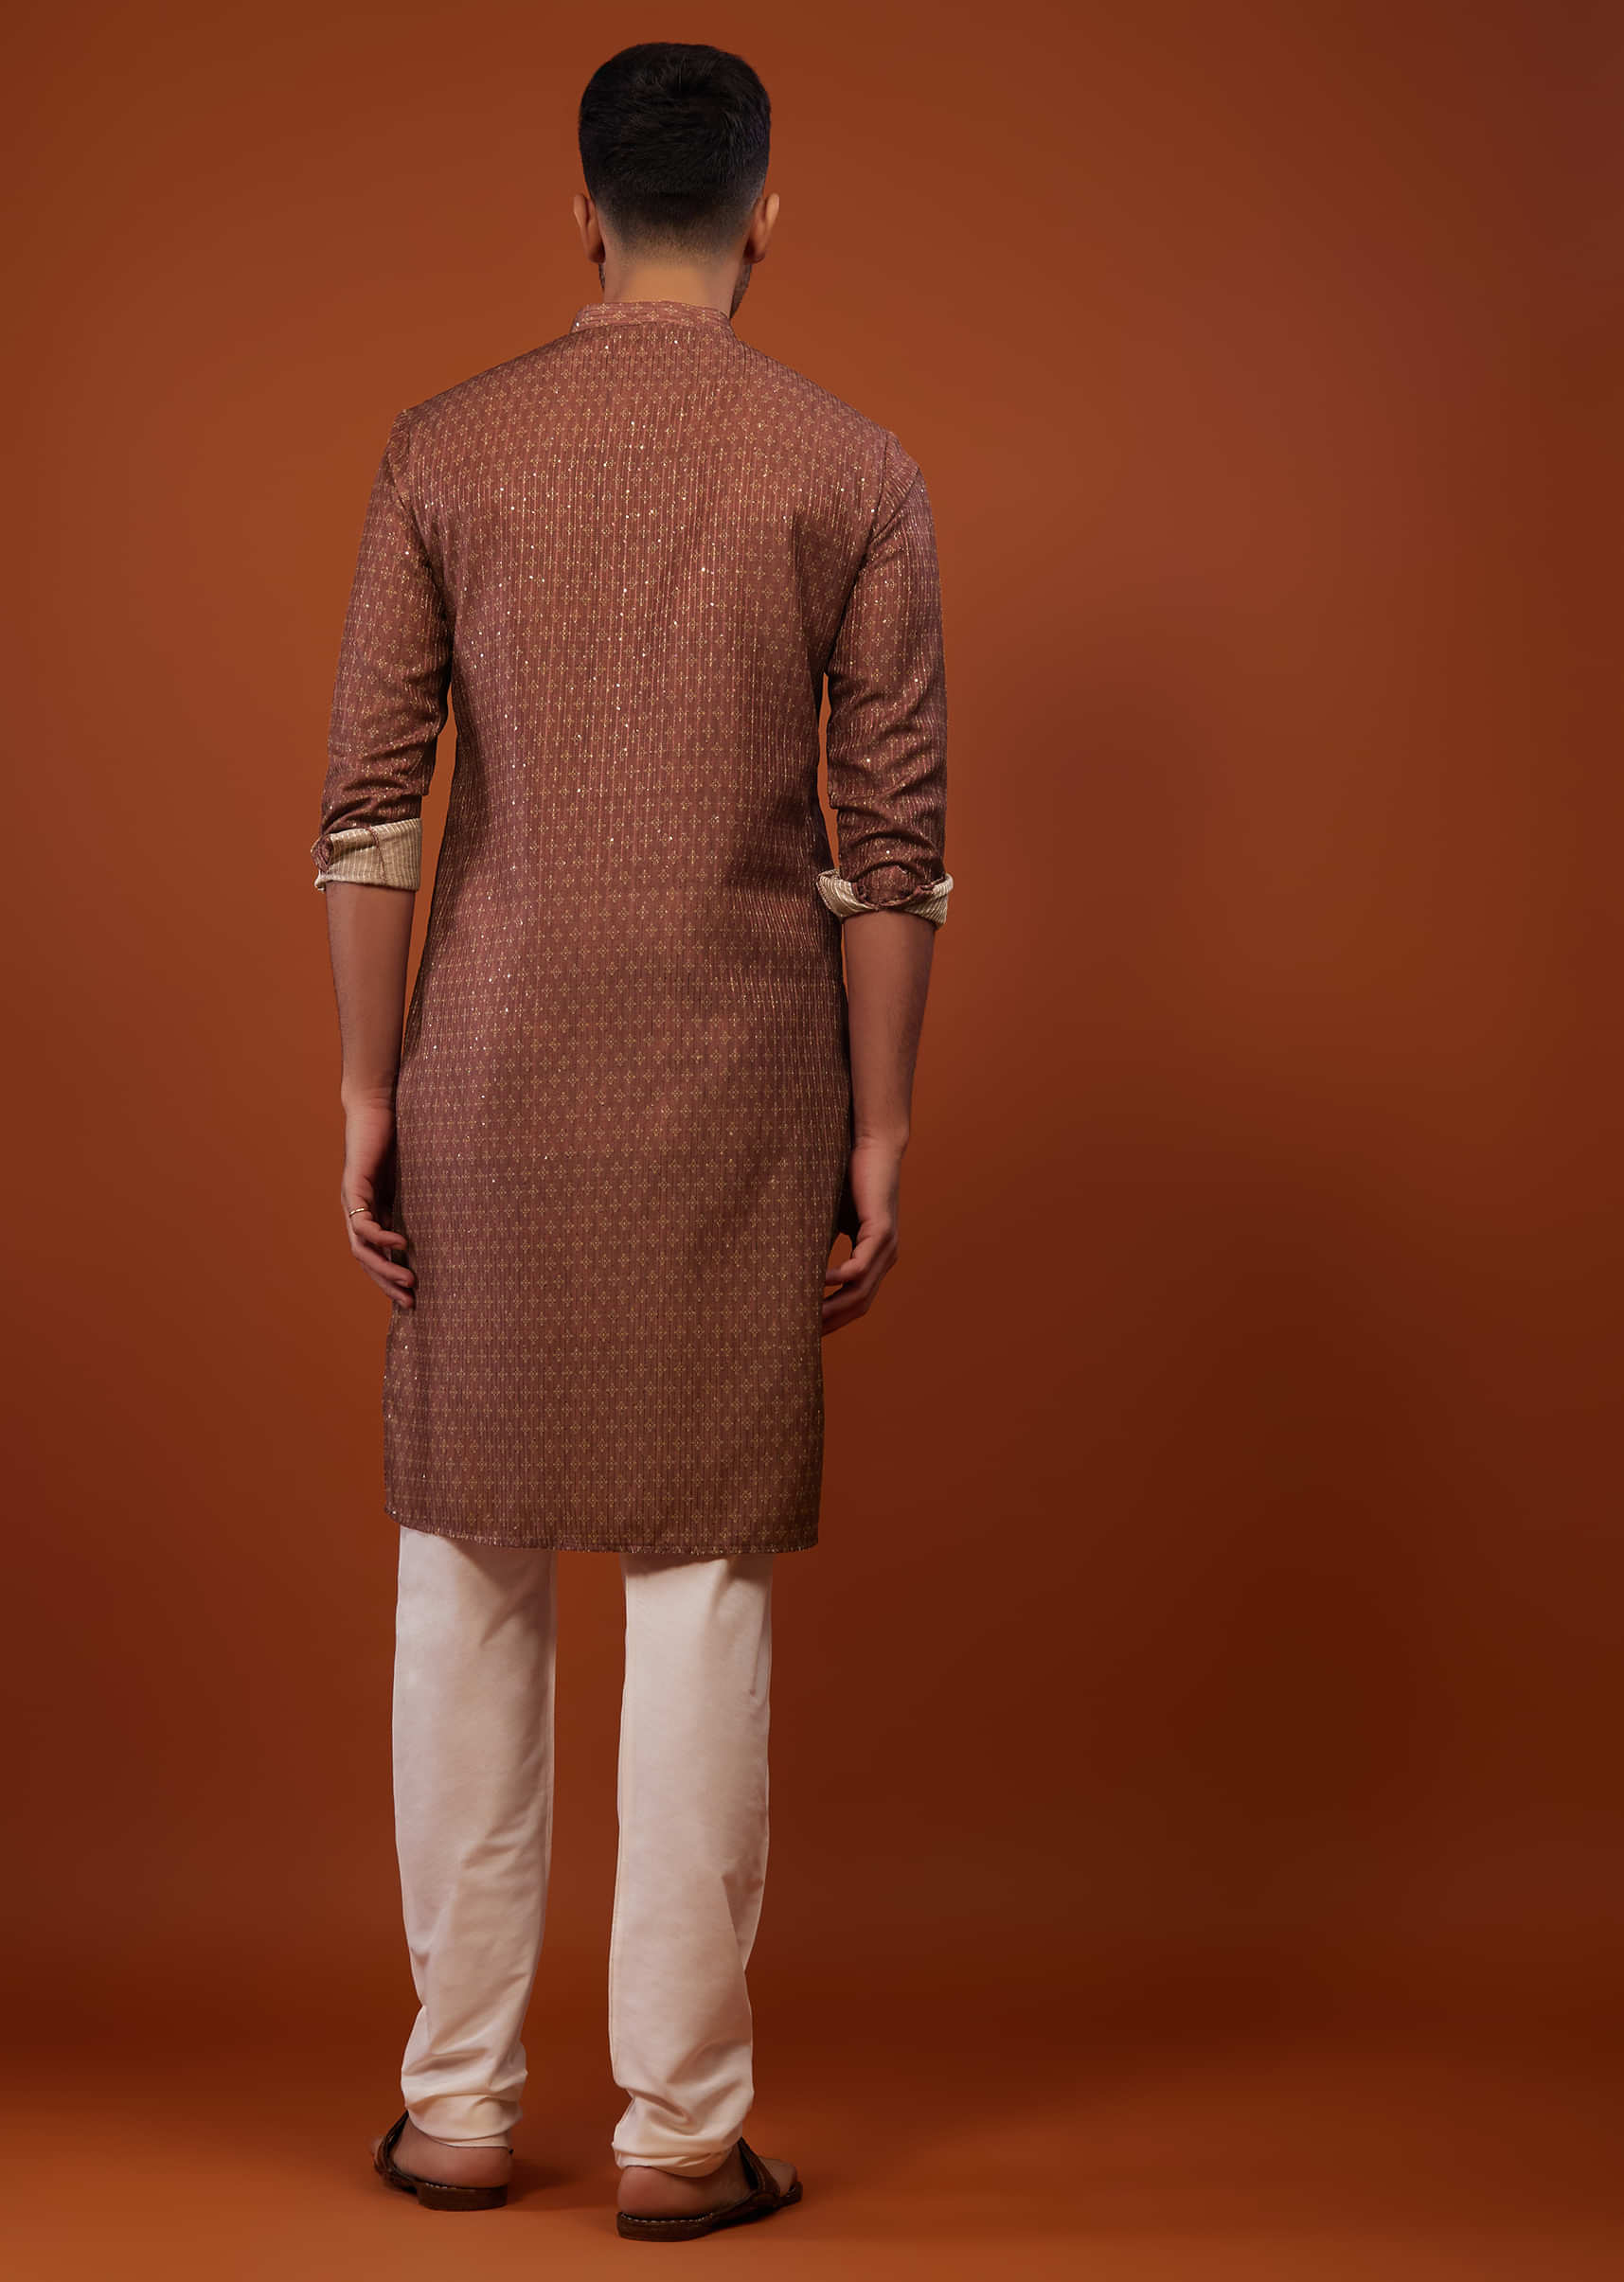 Brick Red Embroidered Kurta Set With Print And Thread Work In Cotton Silk